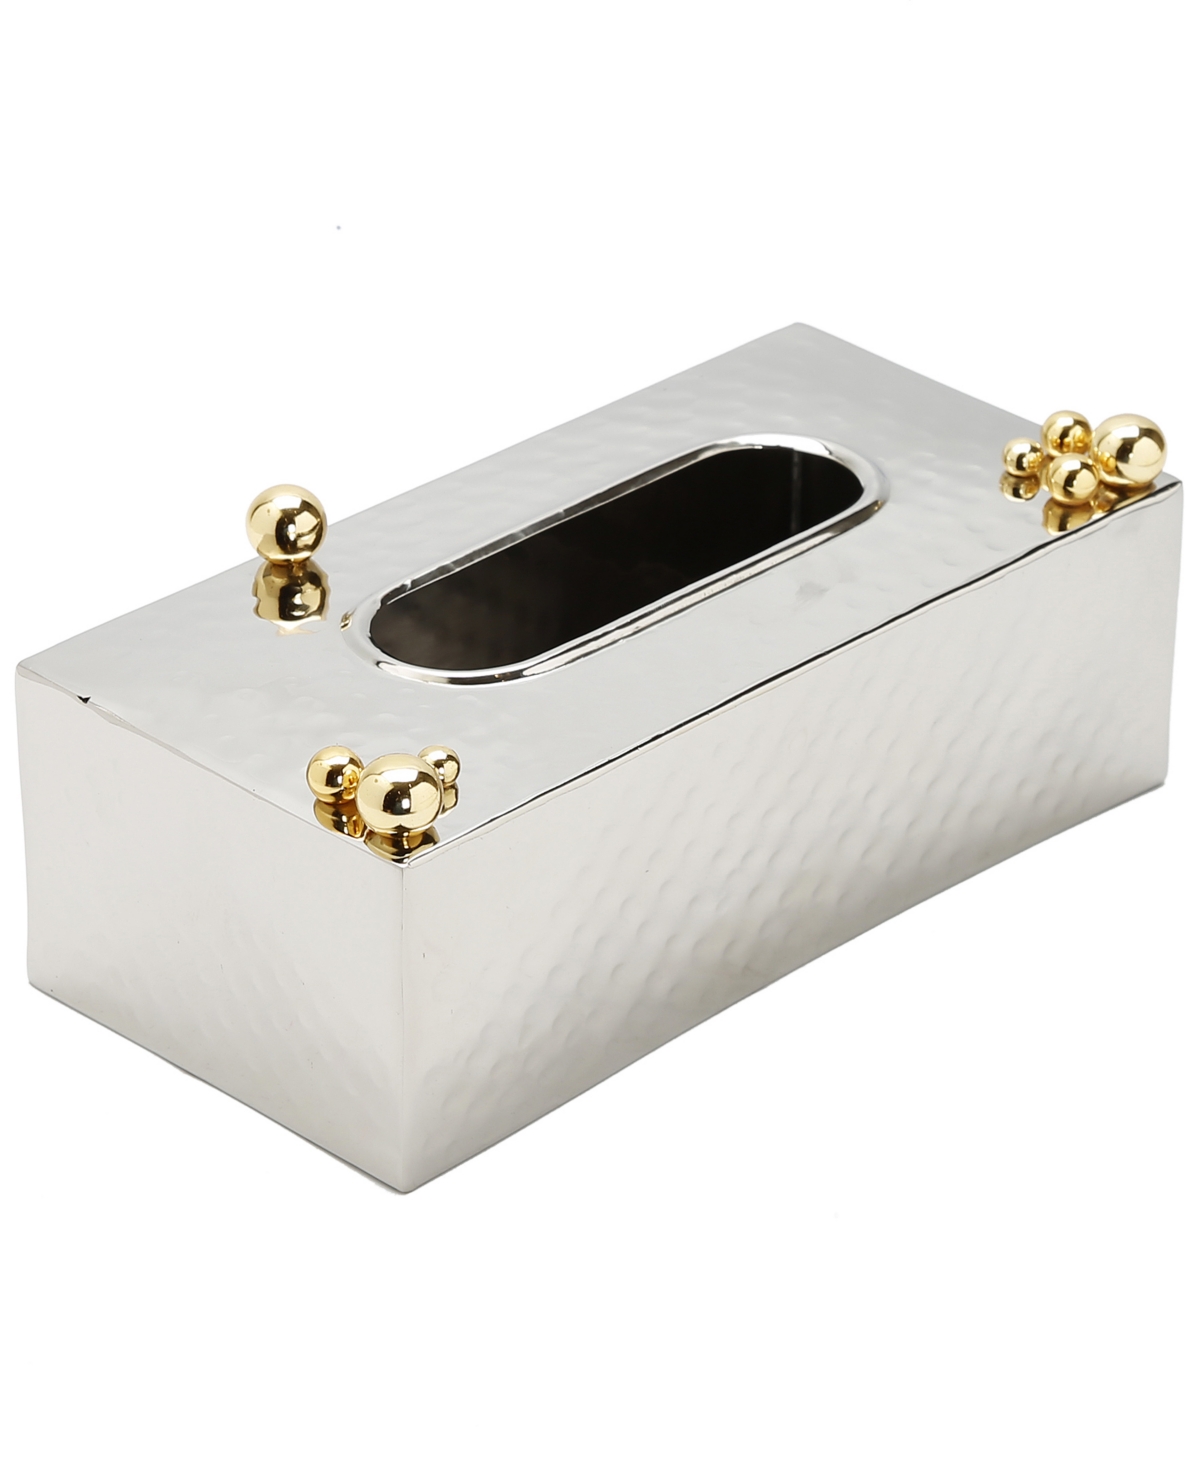 Hammered Stainless Steel Tissue Box Ball Design on Top, 11" x 5" - Silver-Tone and Gold-Tone